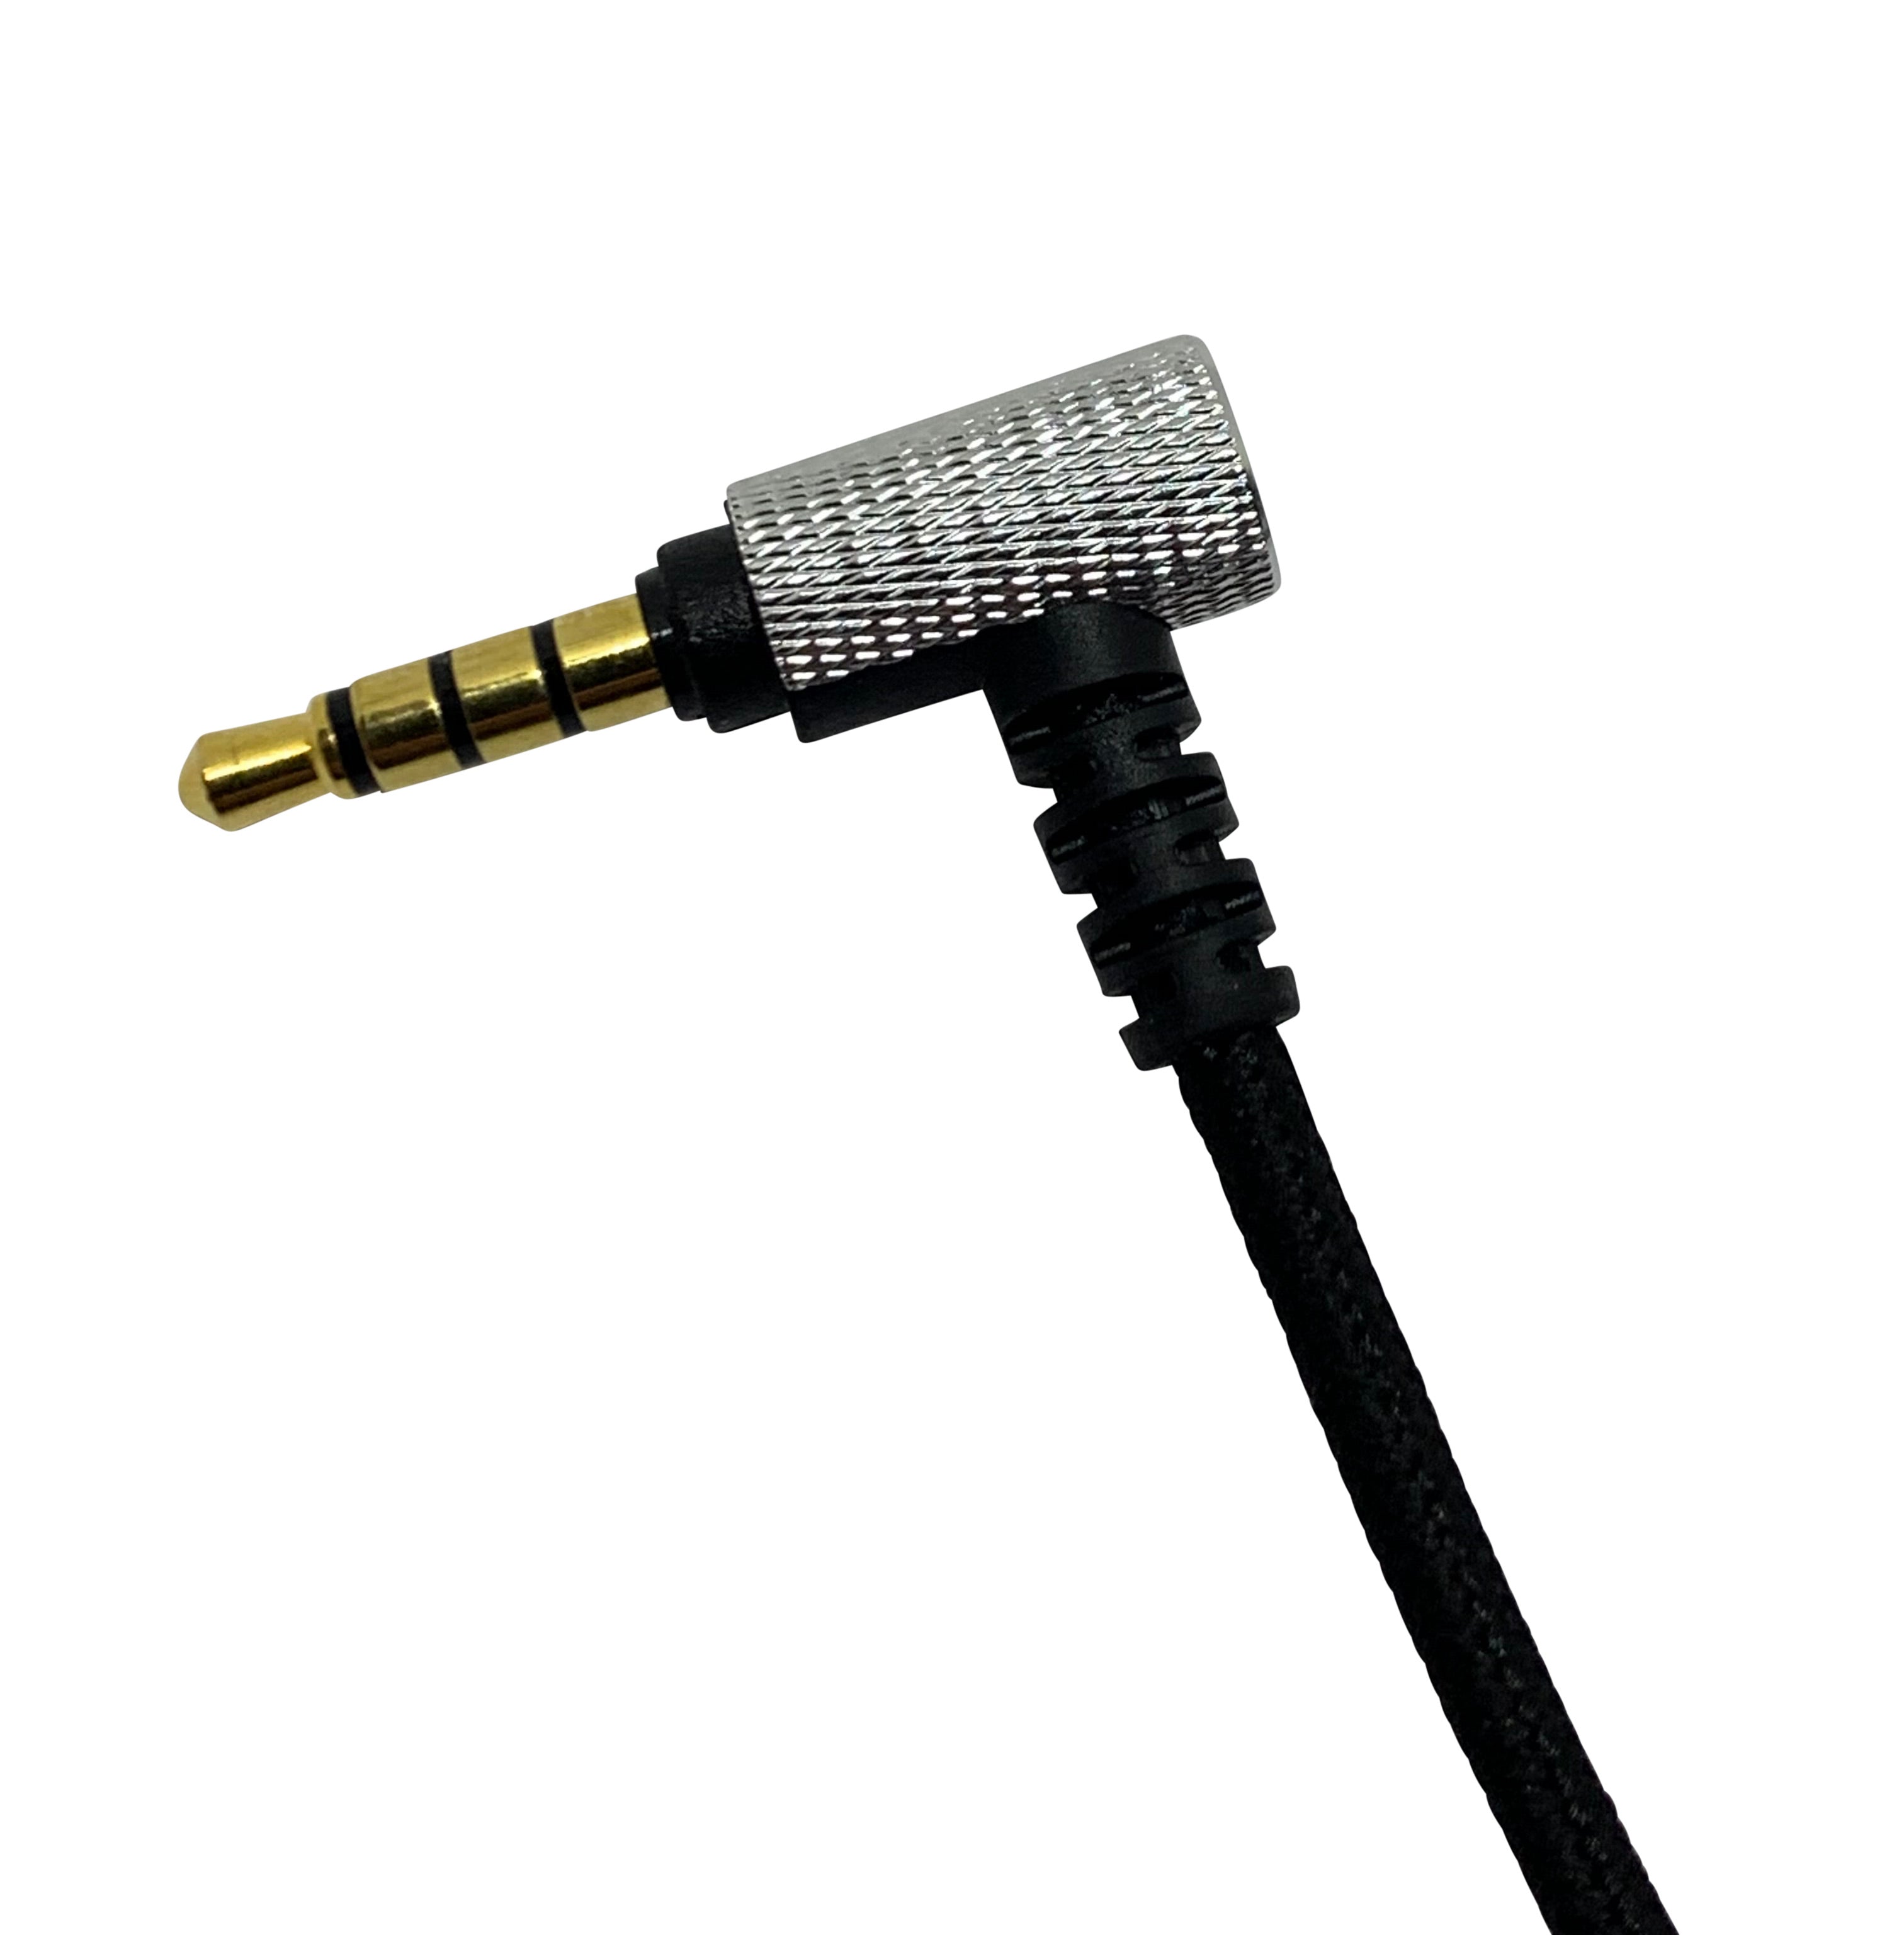 CentralSound Gaming Headset Mic Boom Adapter Cord for Sony Headphones - CentralSound